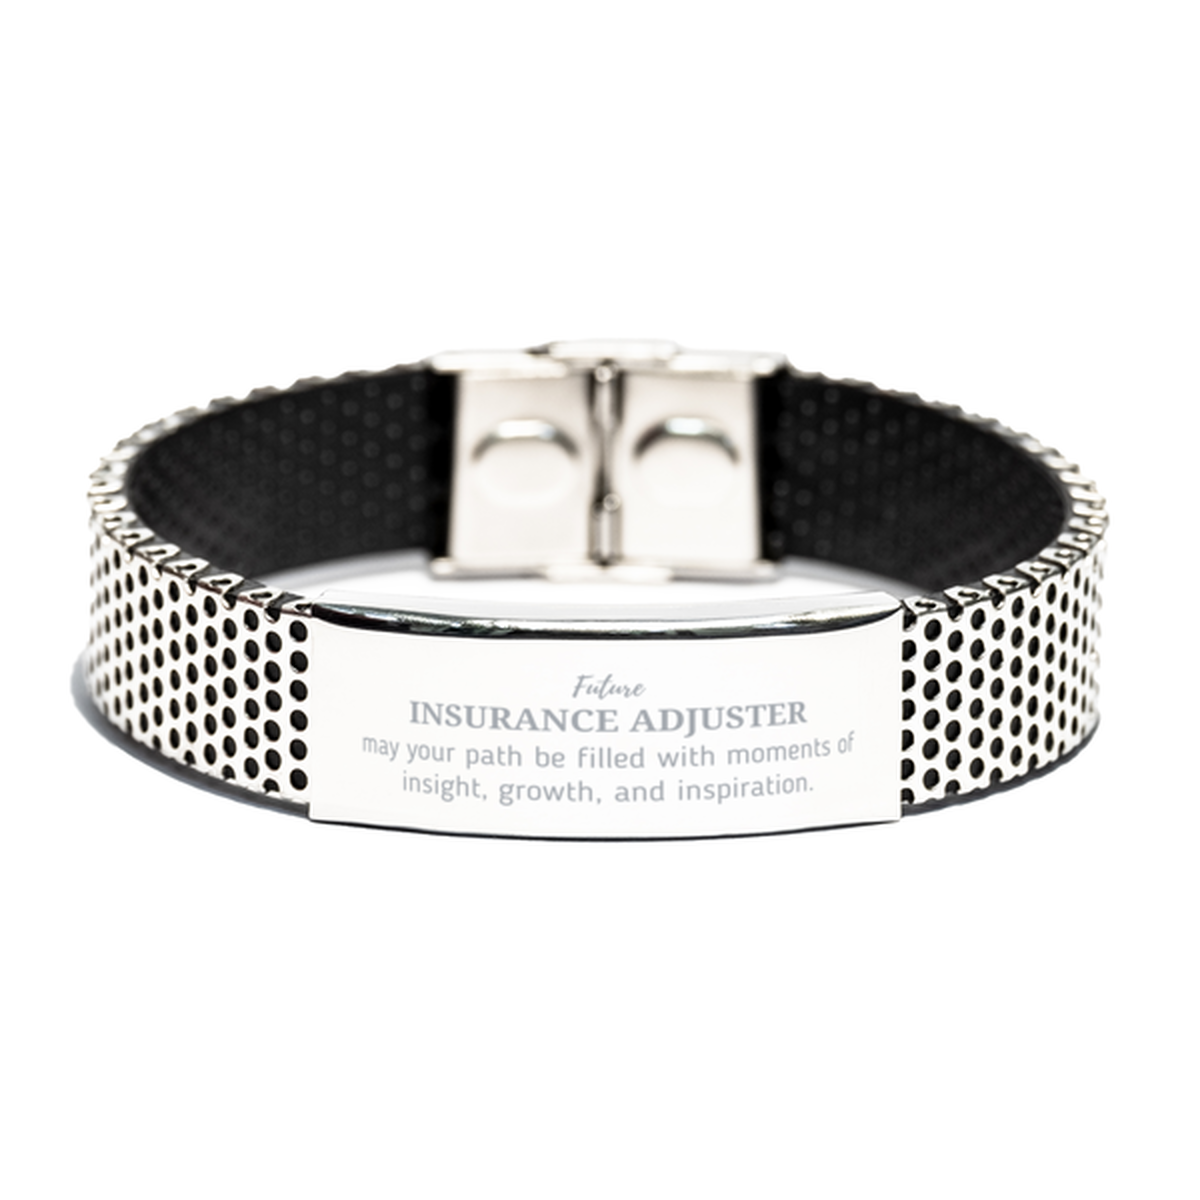 Future Insurance Adjuster Gifts, May your path be filled with moments of insight, Graduation Gifts for New Insurance Adjuster, Christmas Unique Stainless Steel Bracelet For Men, Women, Friends